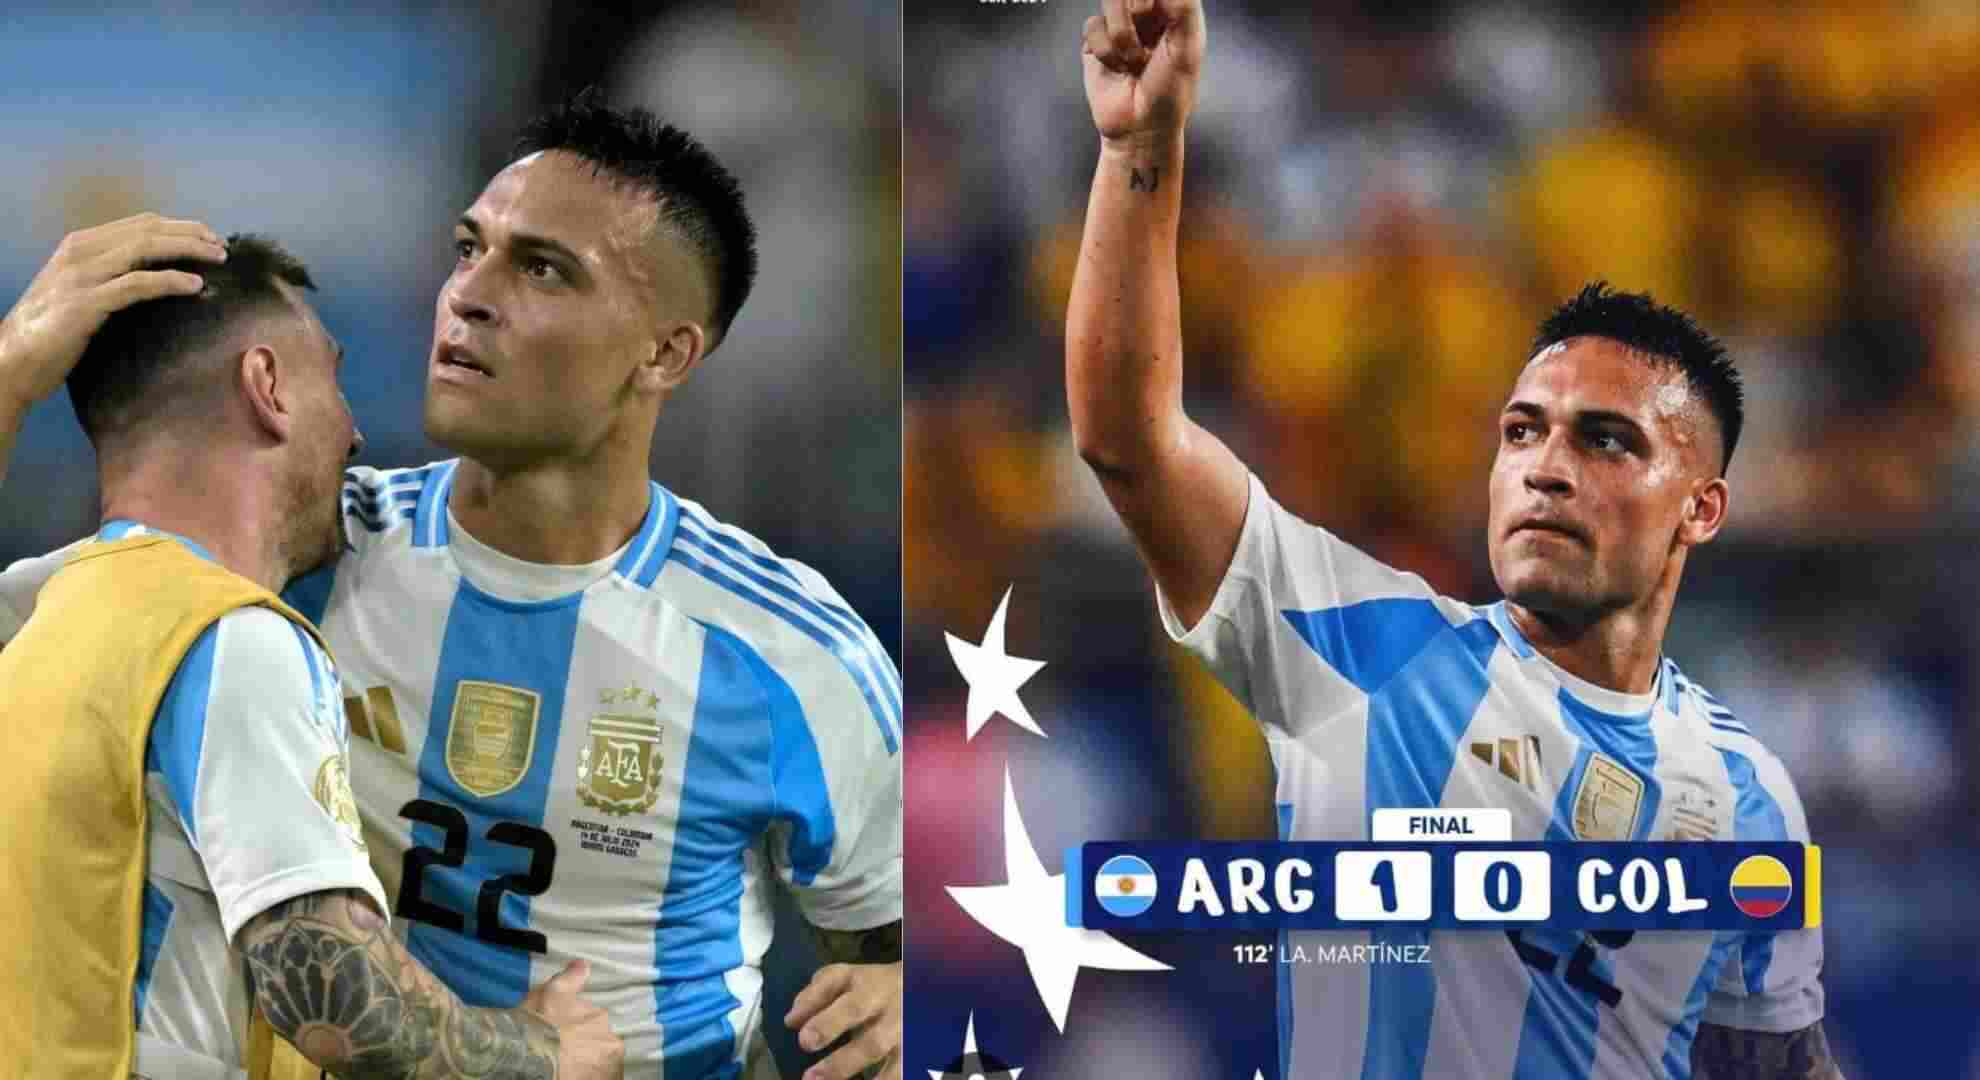 Watch: Lautaro Martinez’s Late Goal Secures Argentina’s 16th Copa America Title Victory